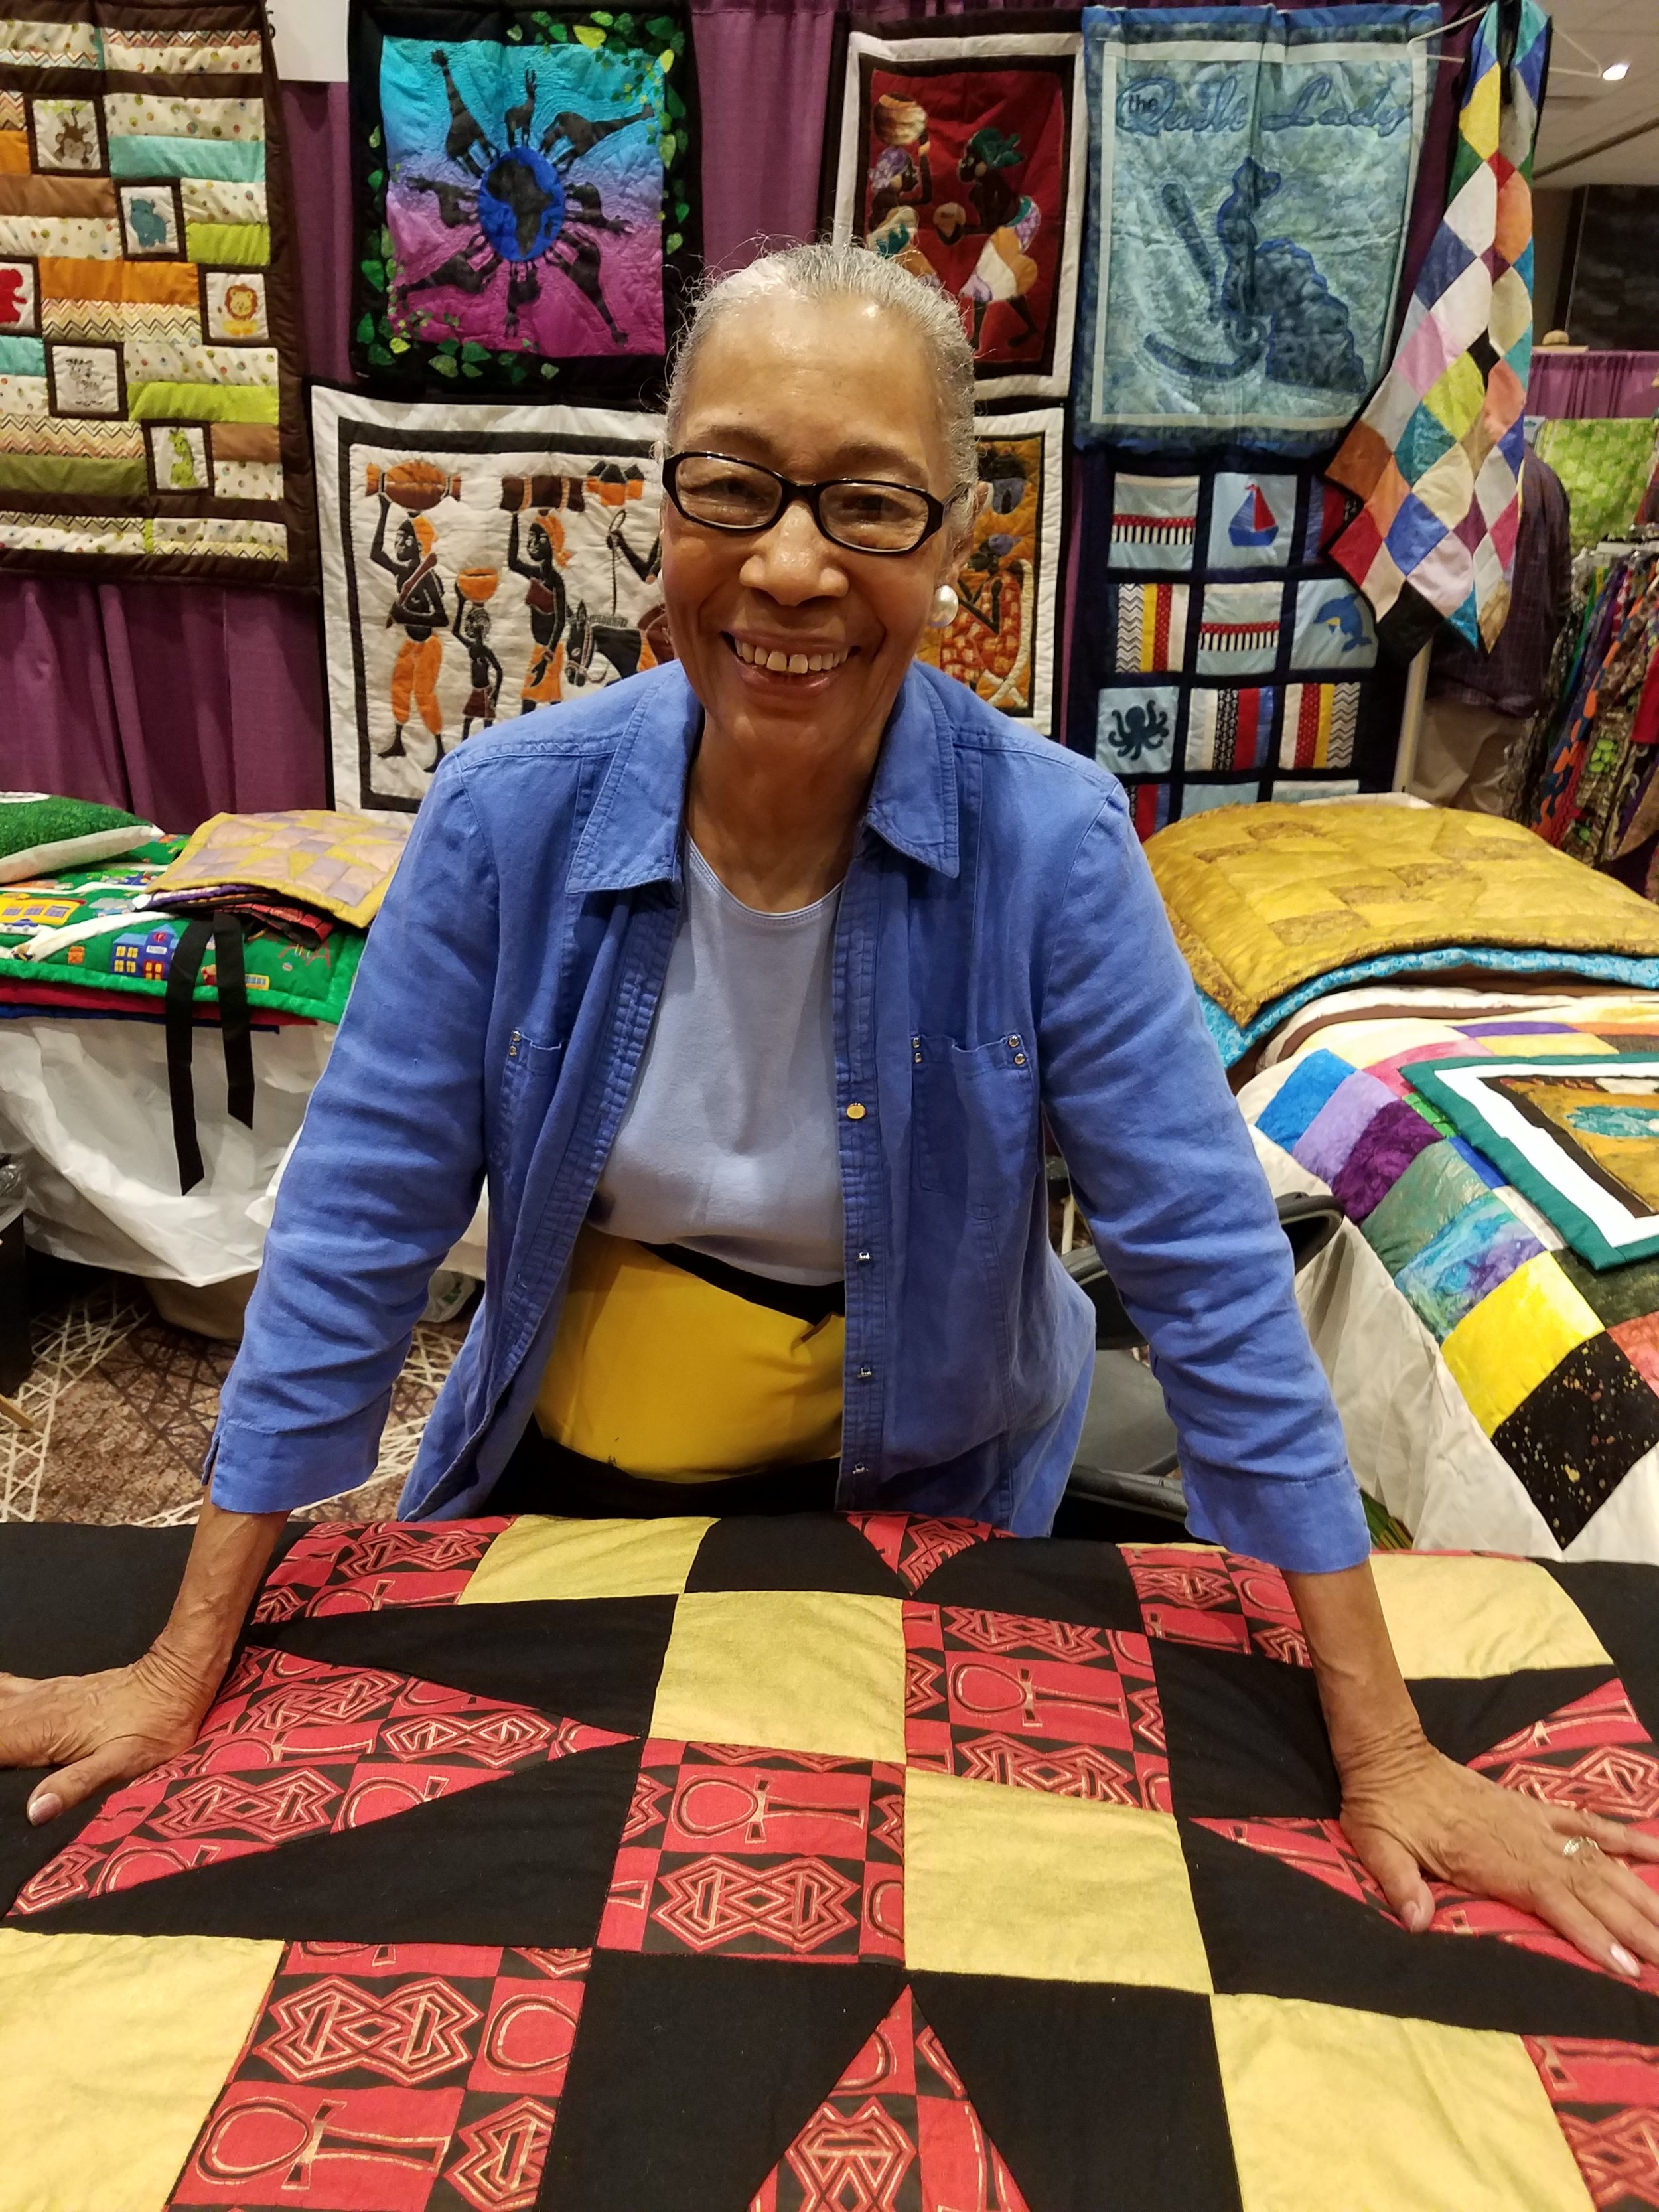 quilt artist Loretta Craig, displaying several colorful quilts